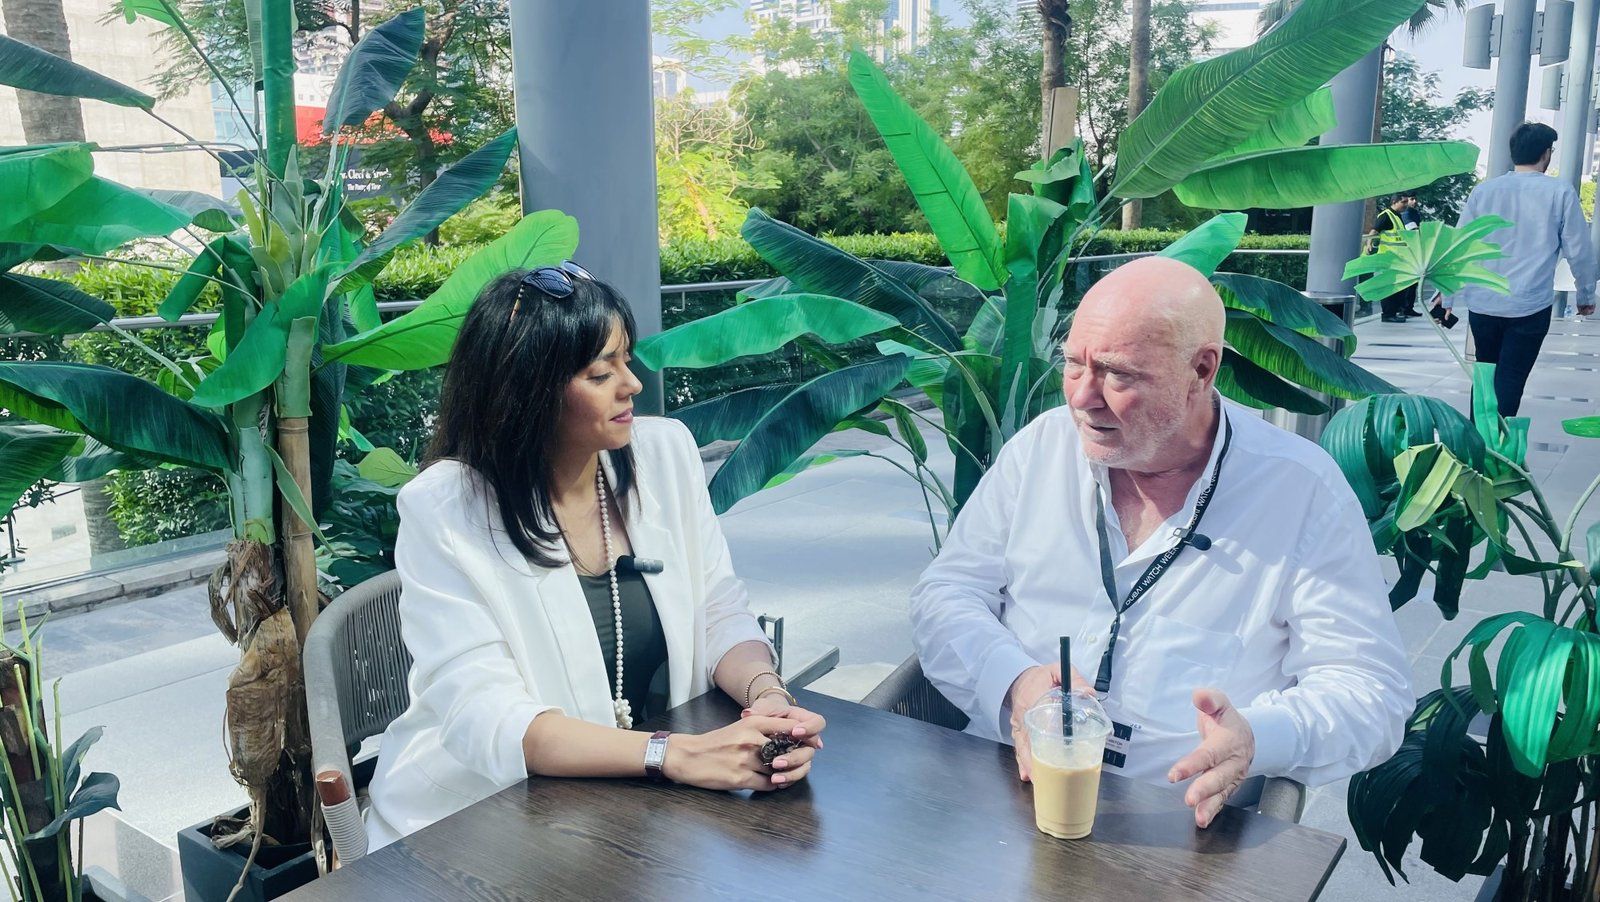 In conversation with The Godfather Of The Watch Industry, Jean-Claude Biver